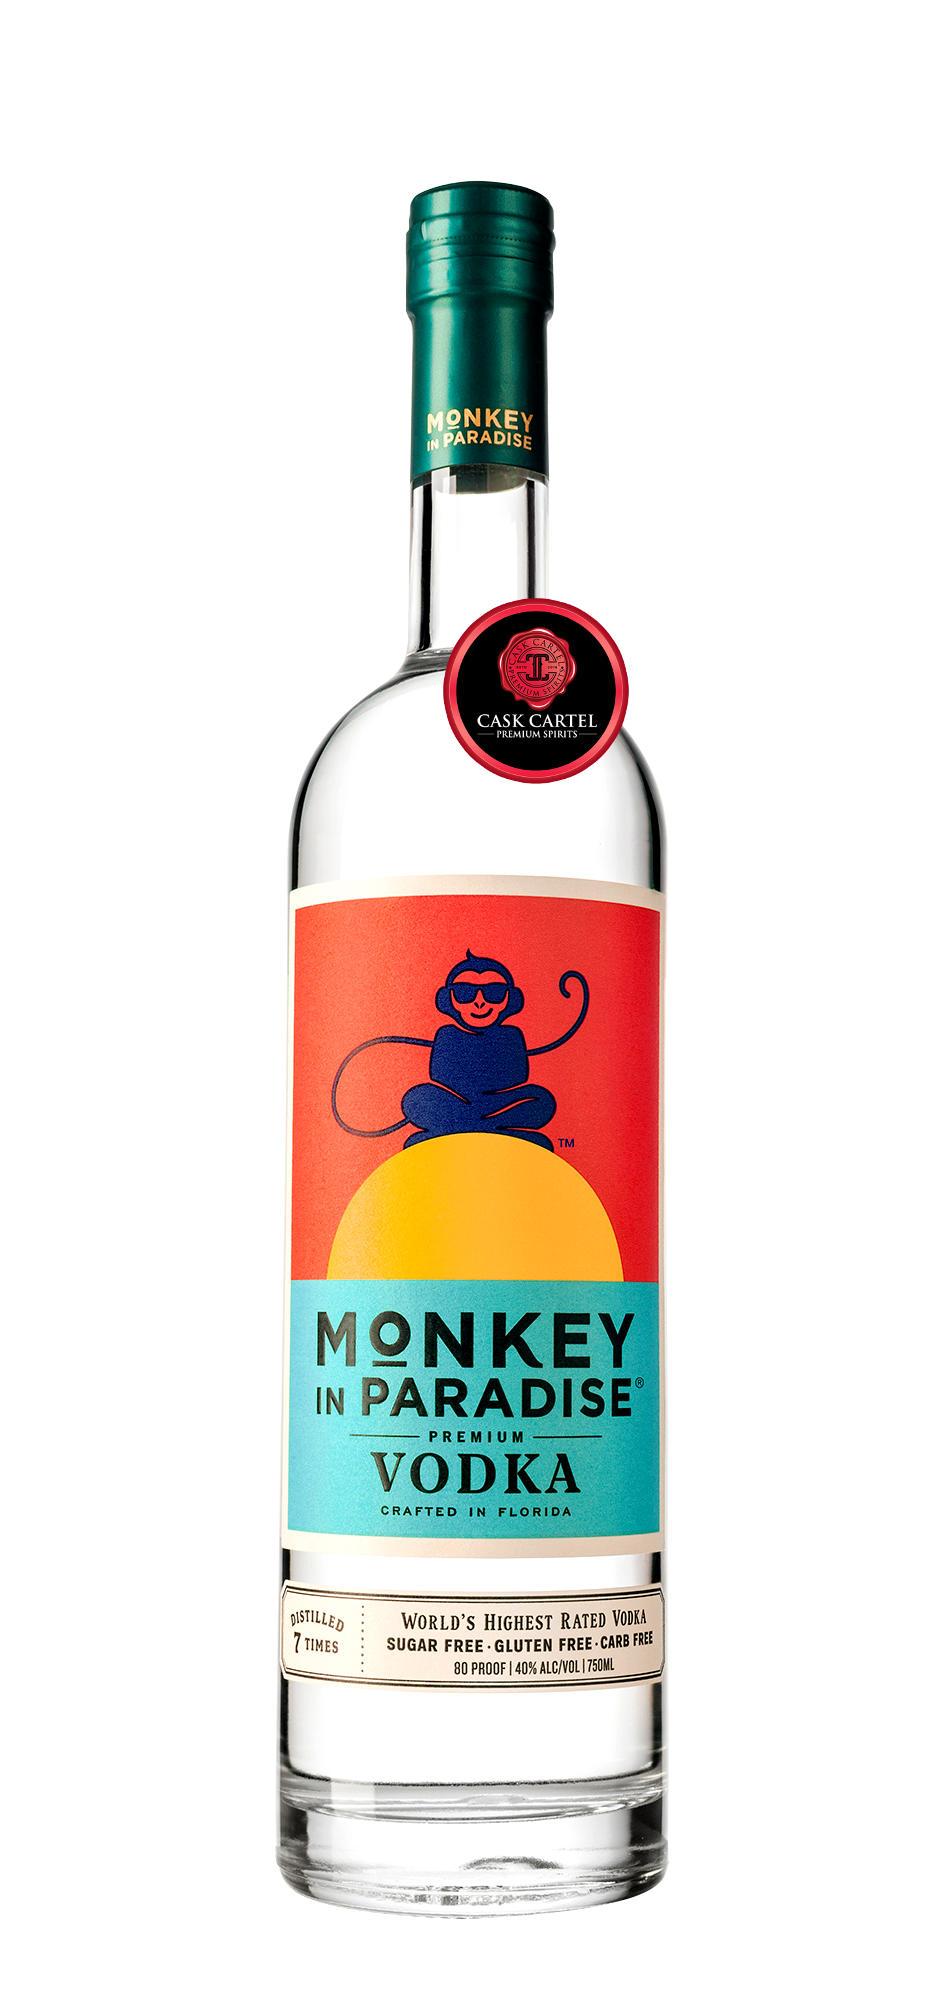 Monkey in Paradise Vodka Collection at CaskCartel.com